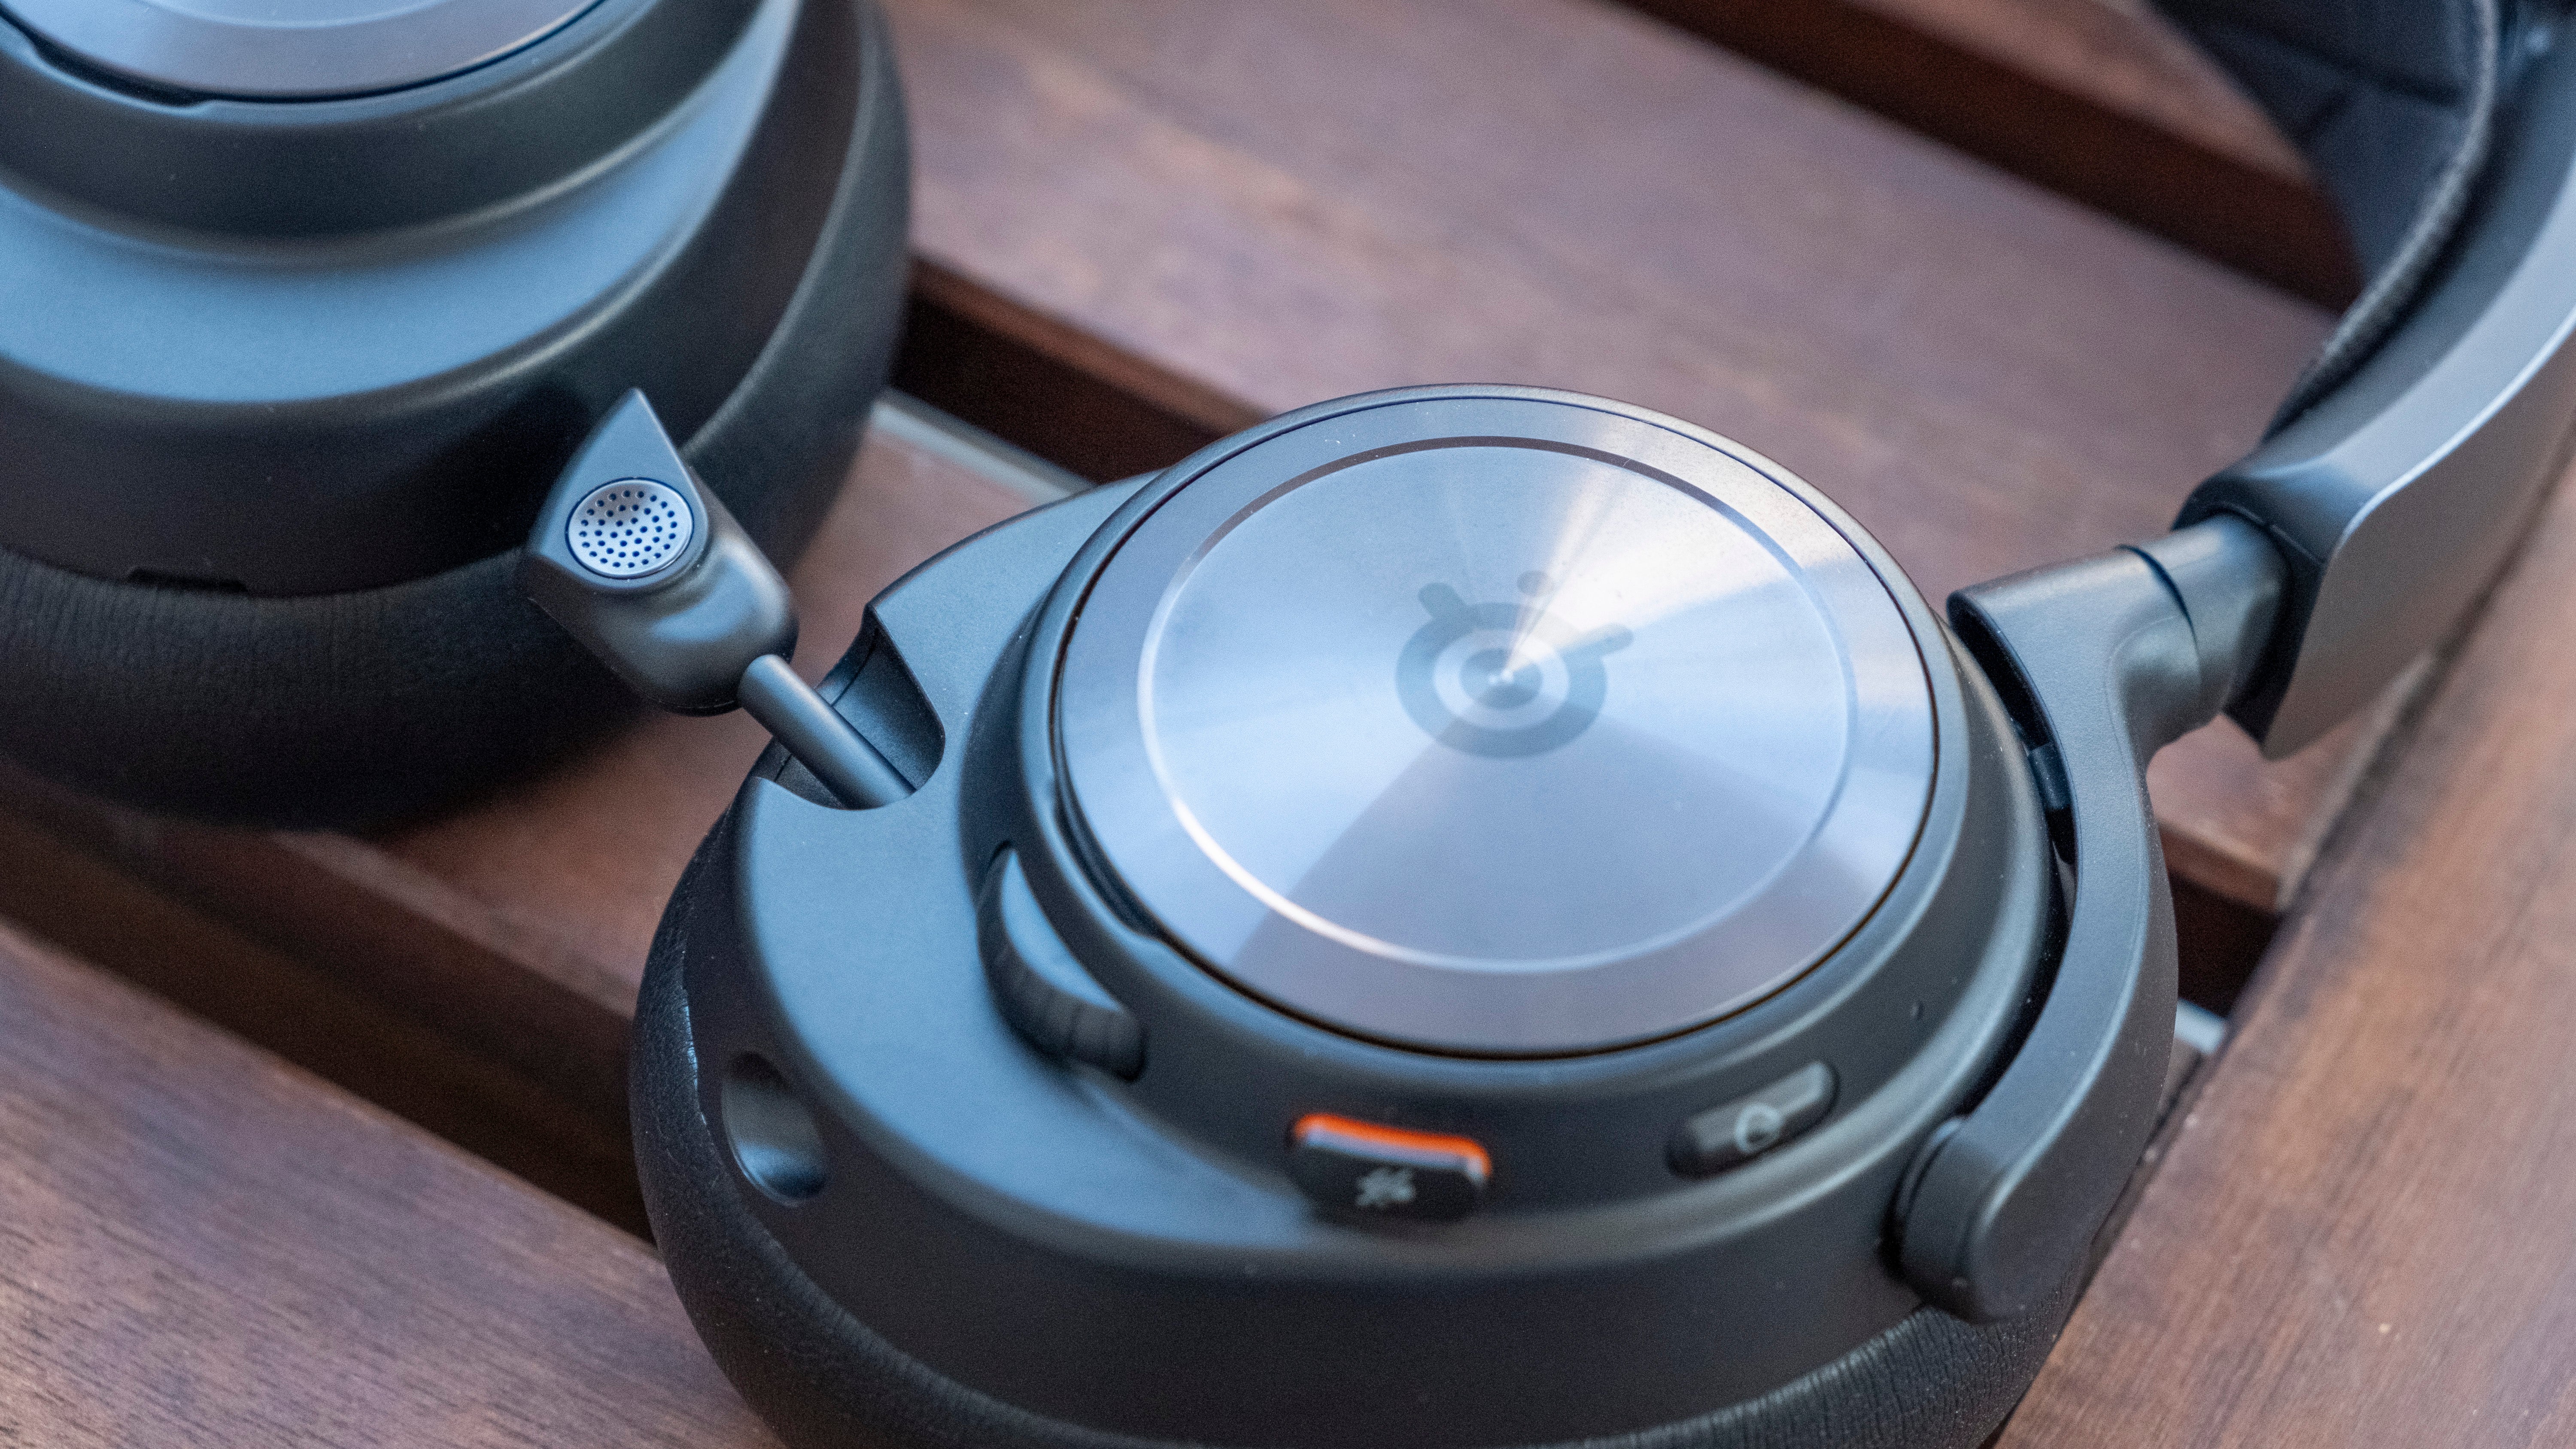 steelseries arctis nova pro and nova pro wireless gaming headsets and their base stations